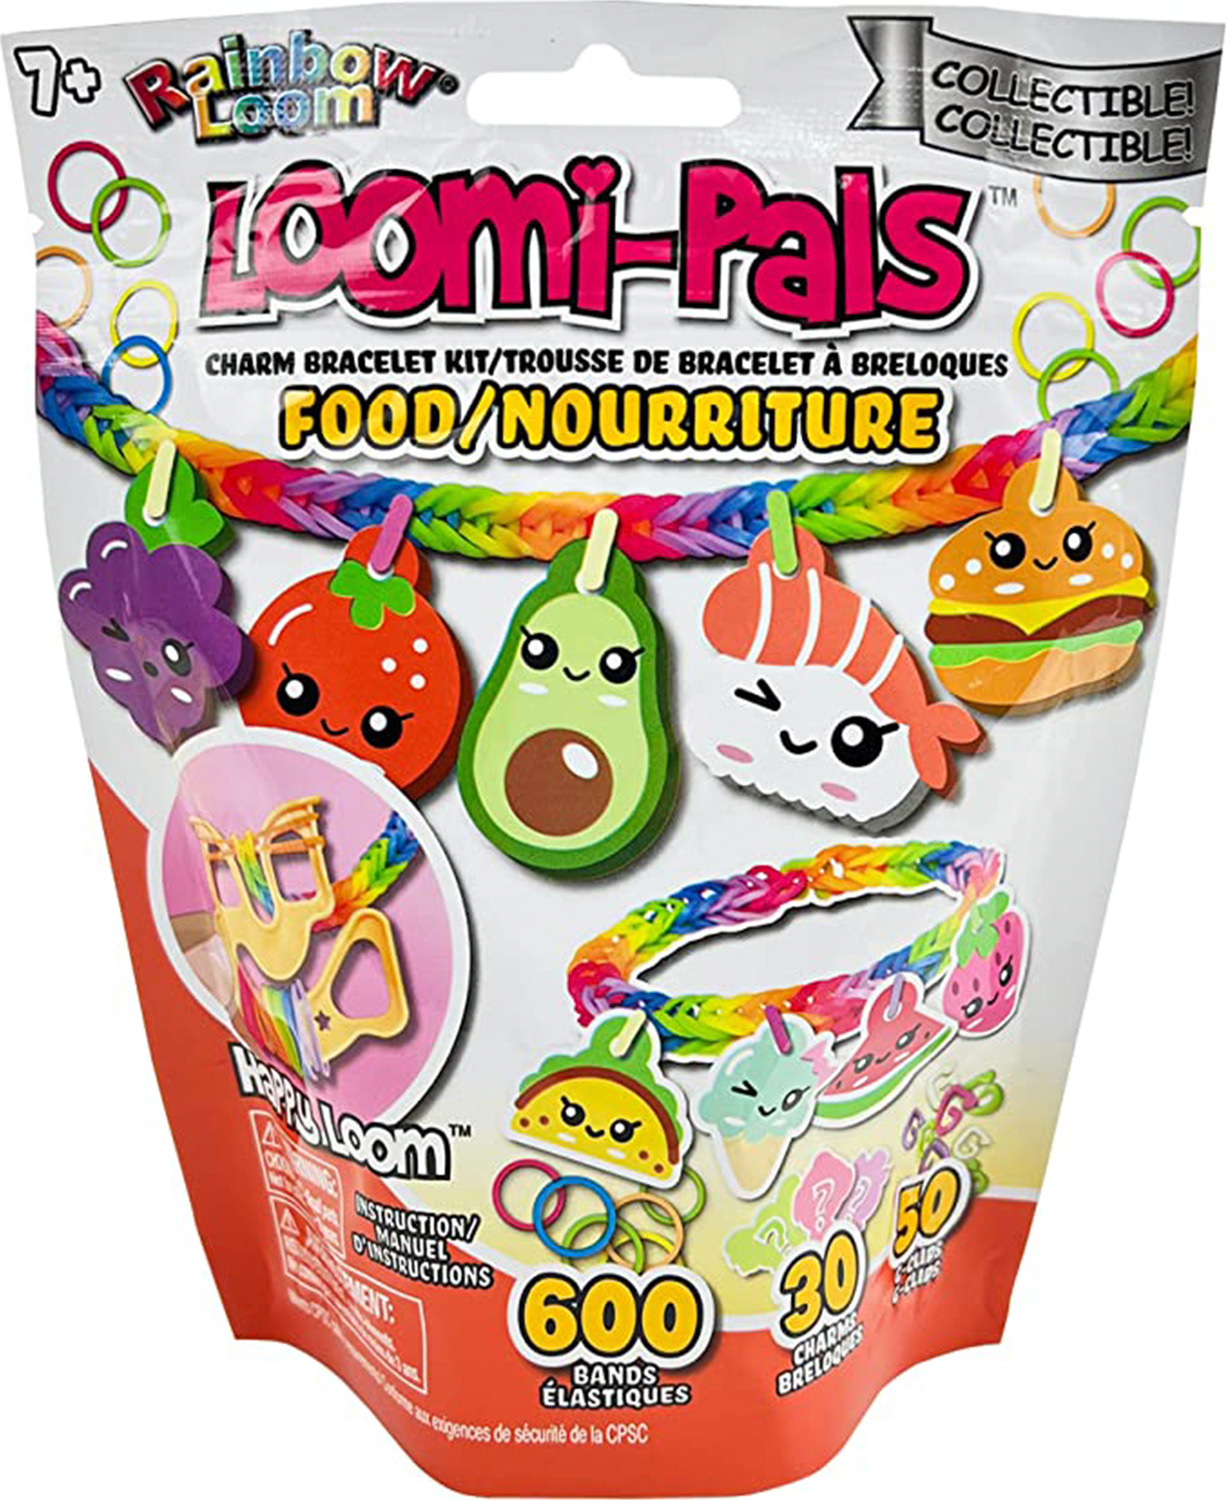 Loomi-Pals Collectible Charm Bracelet Kit - Food - The Toy Box Hanover